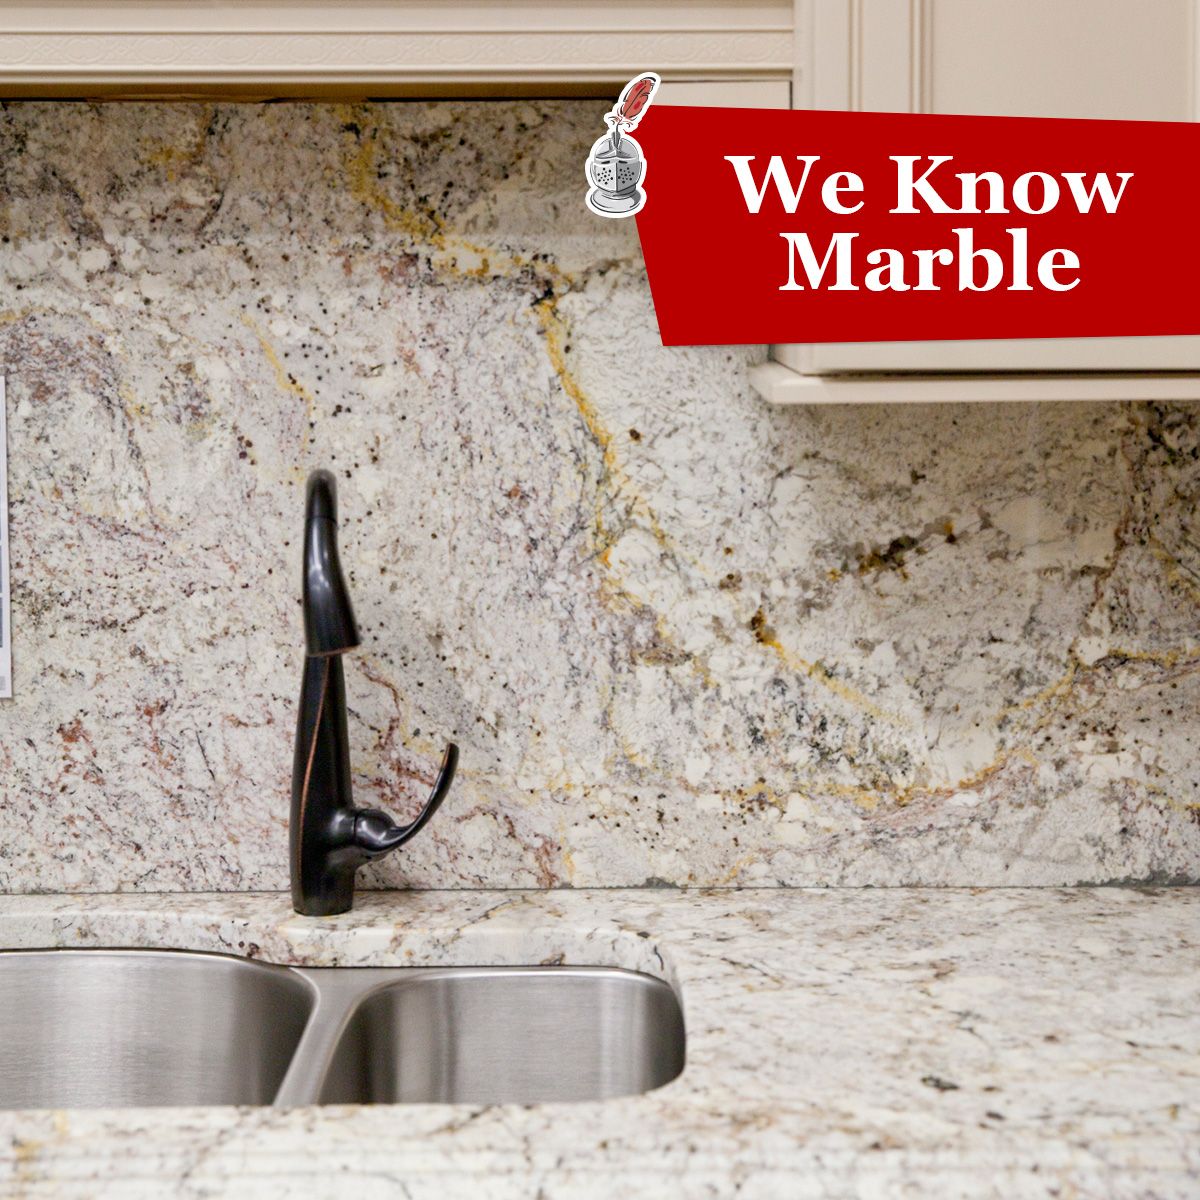 We Know Marble